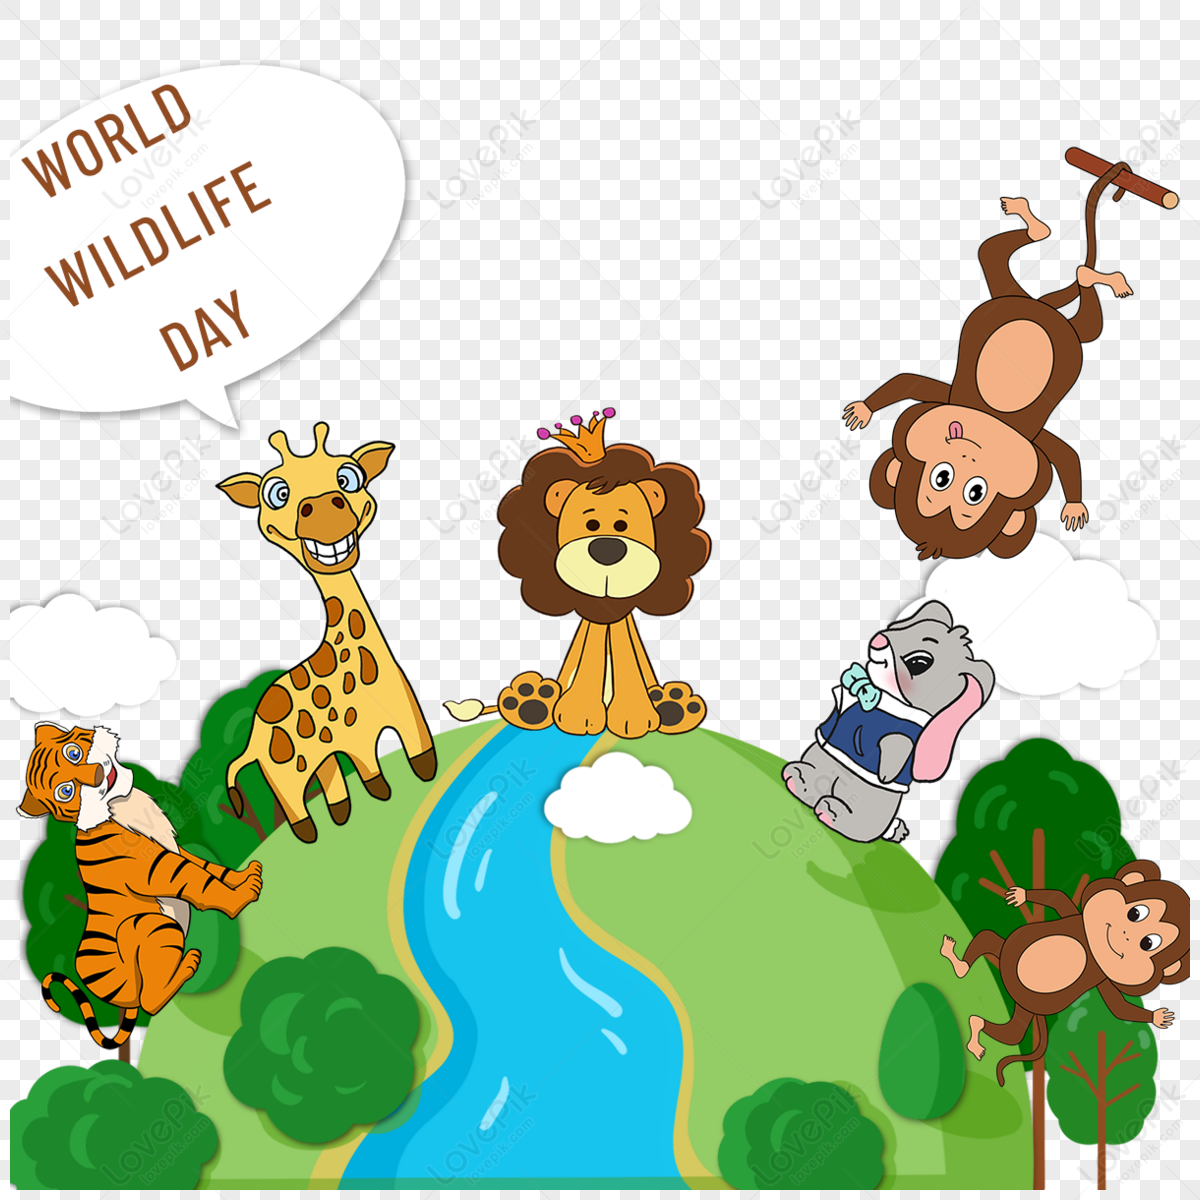 Cute animals world wildlife day,character,honey,happy png hd transparent image